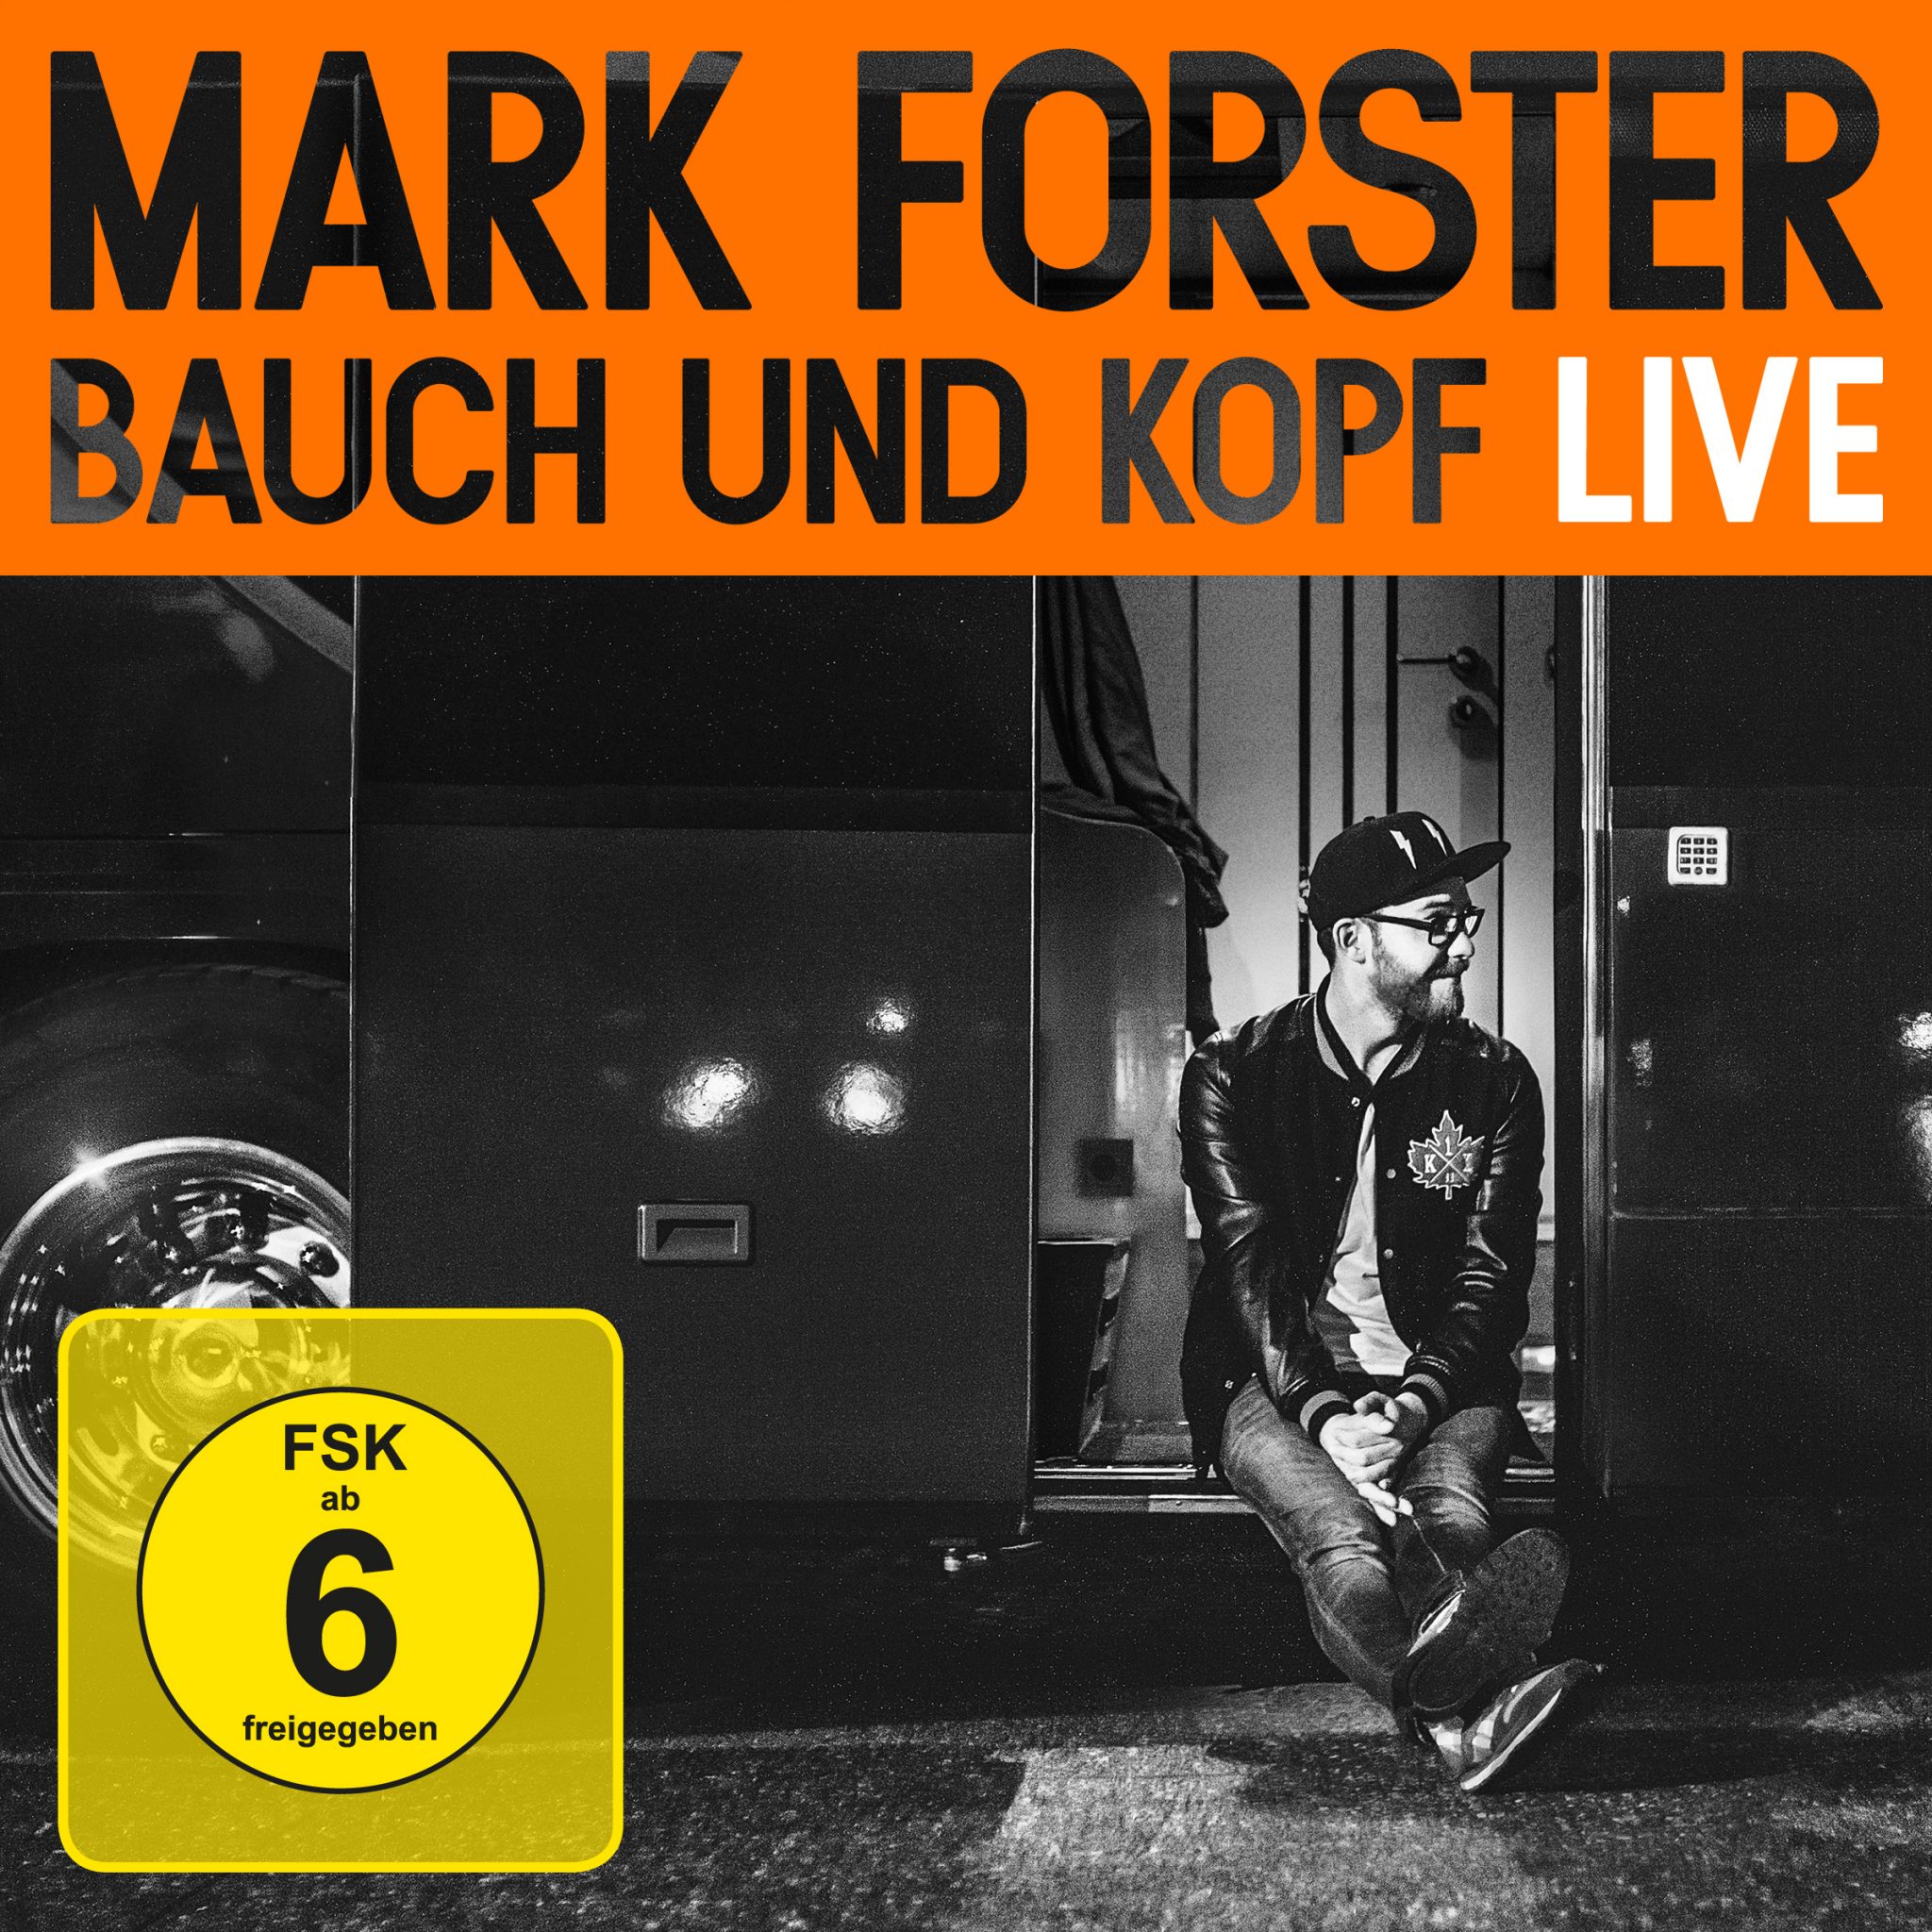 Mark forster single flash mich